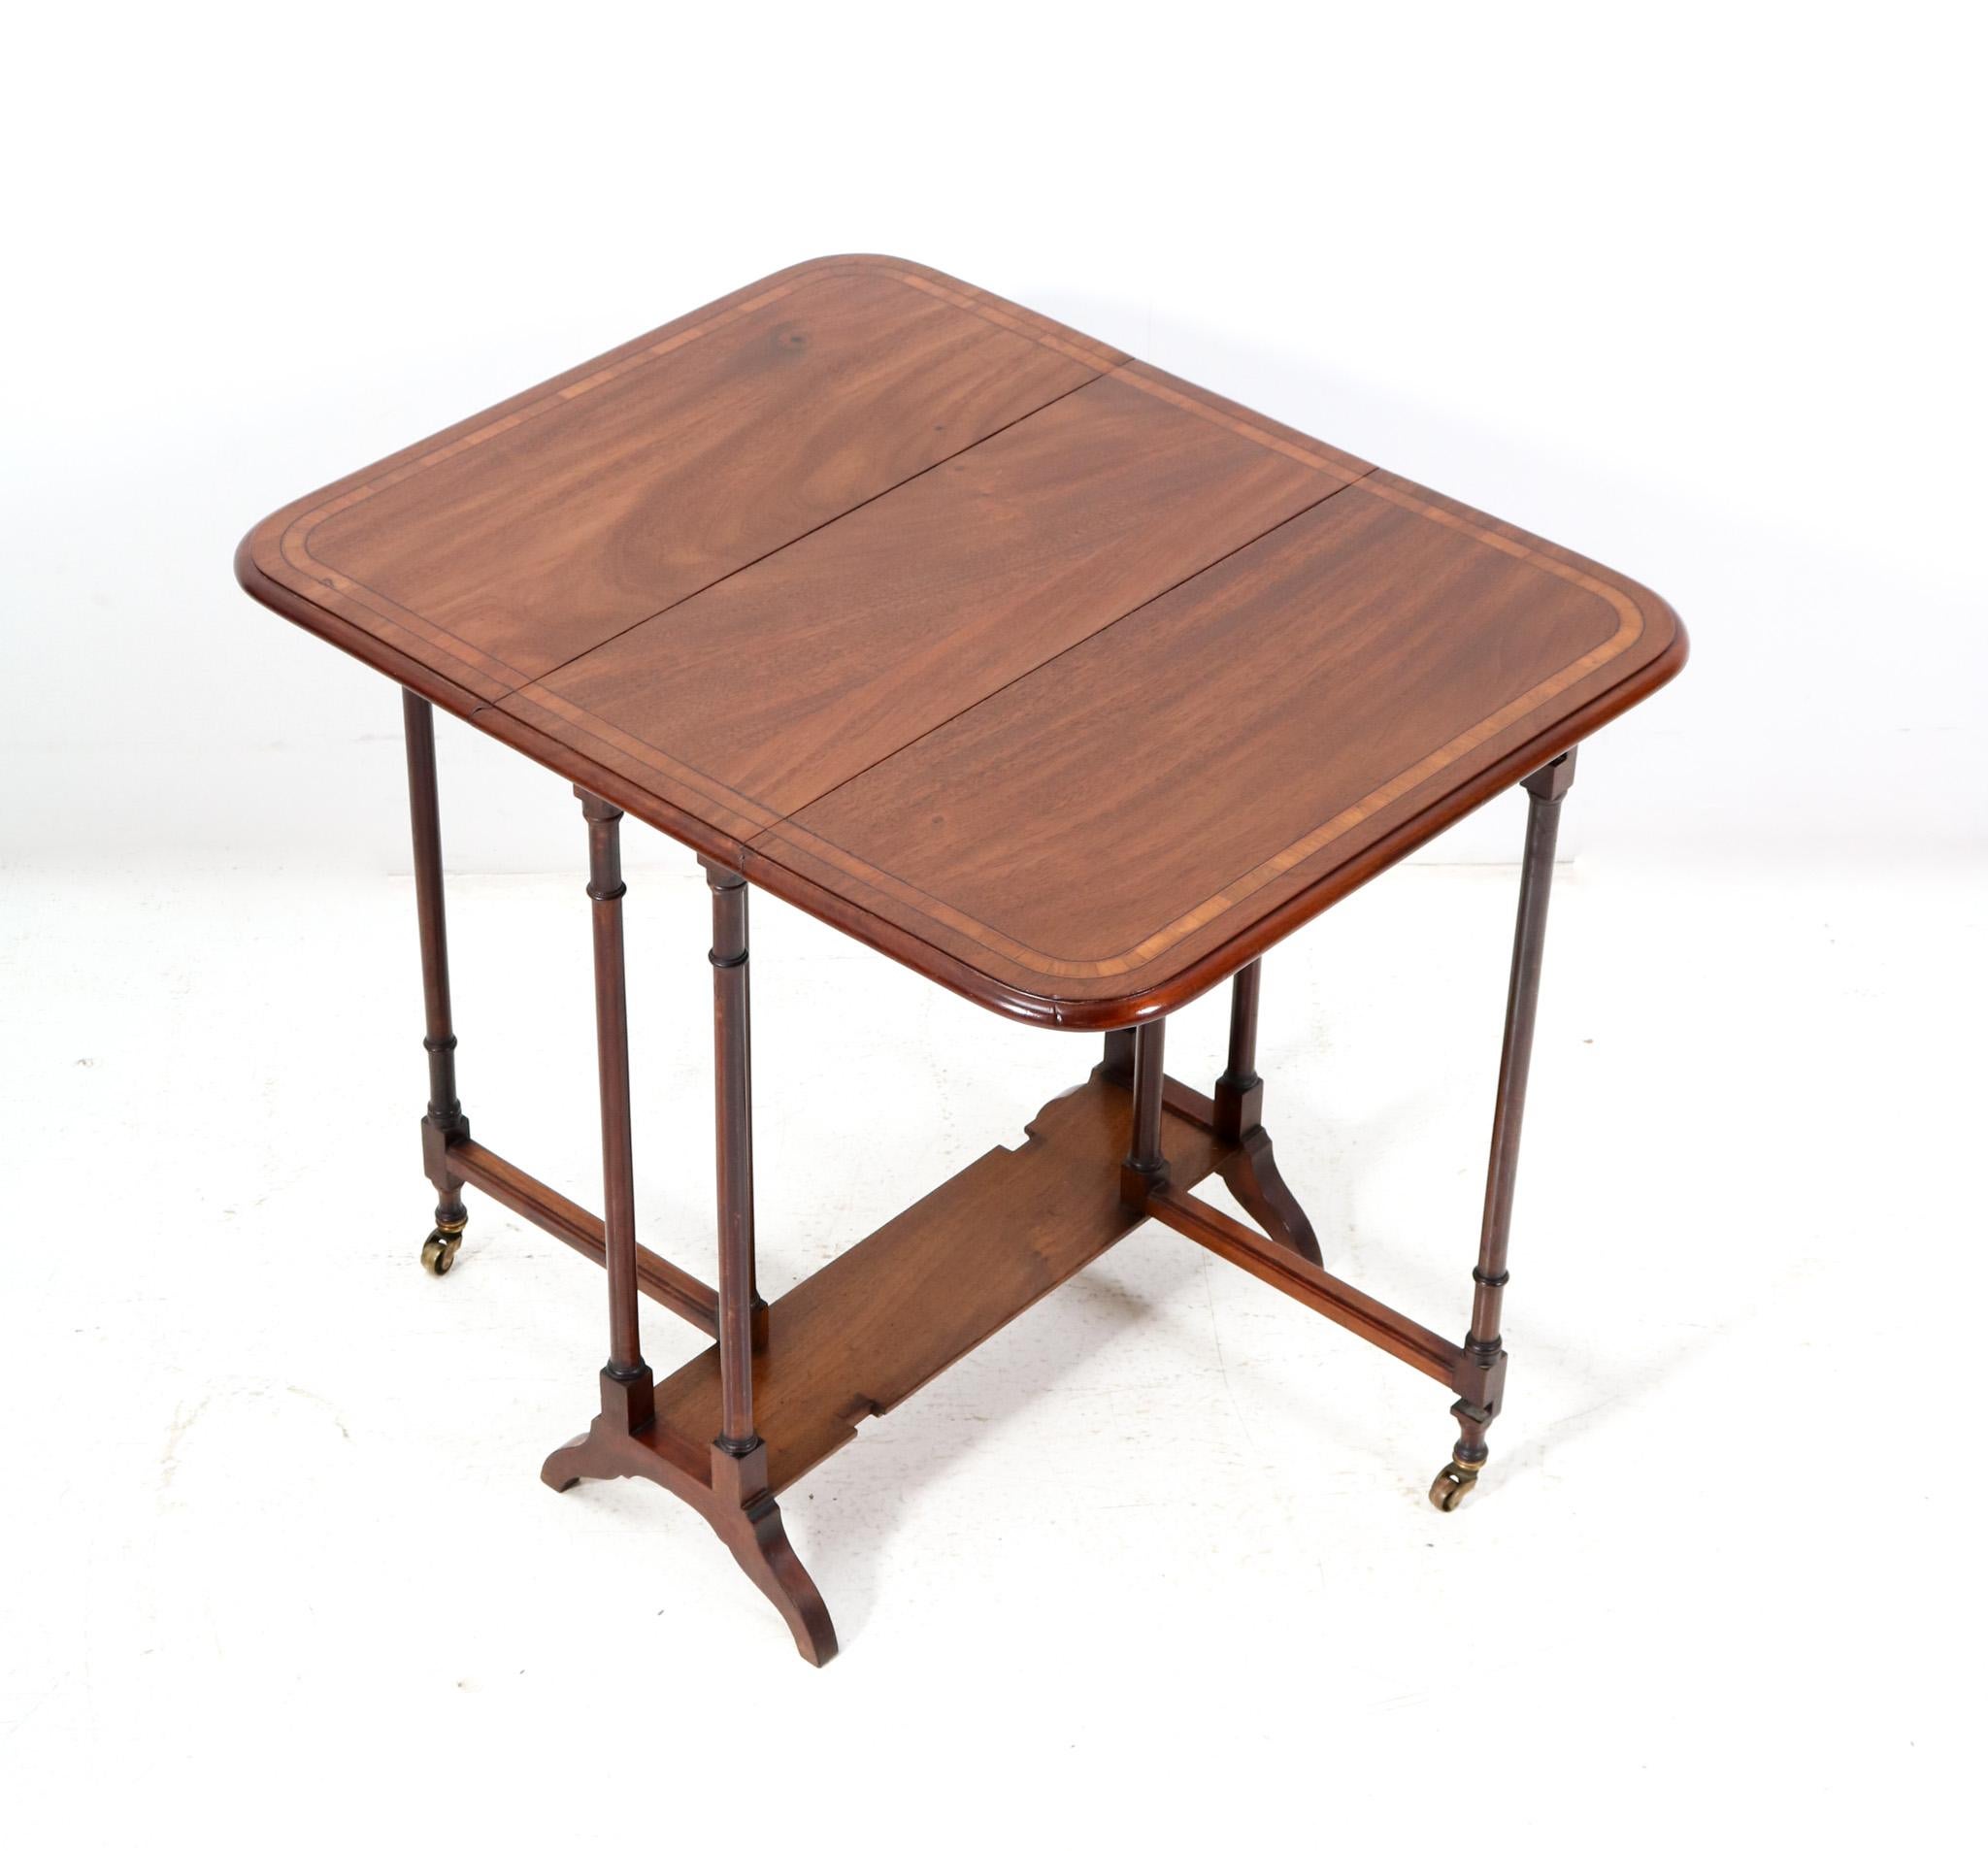 British Walnut English 19th Century Spider Leg Table with Drop Leaves For Sale